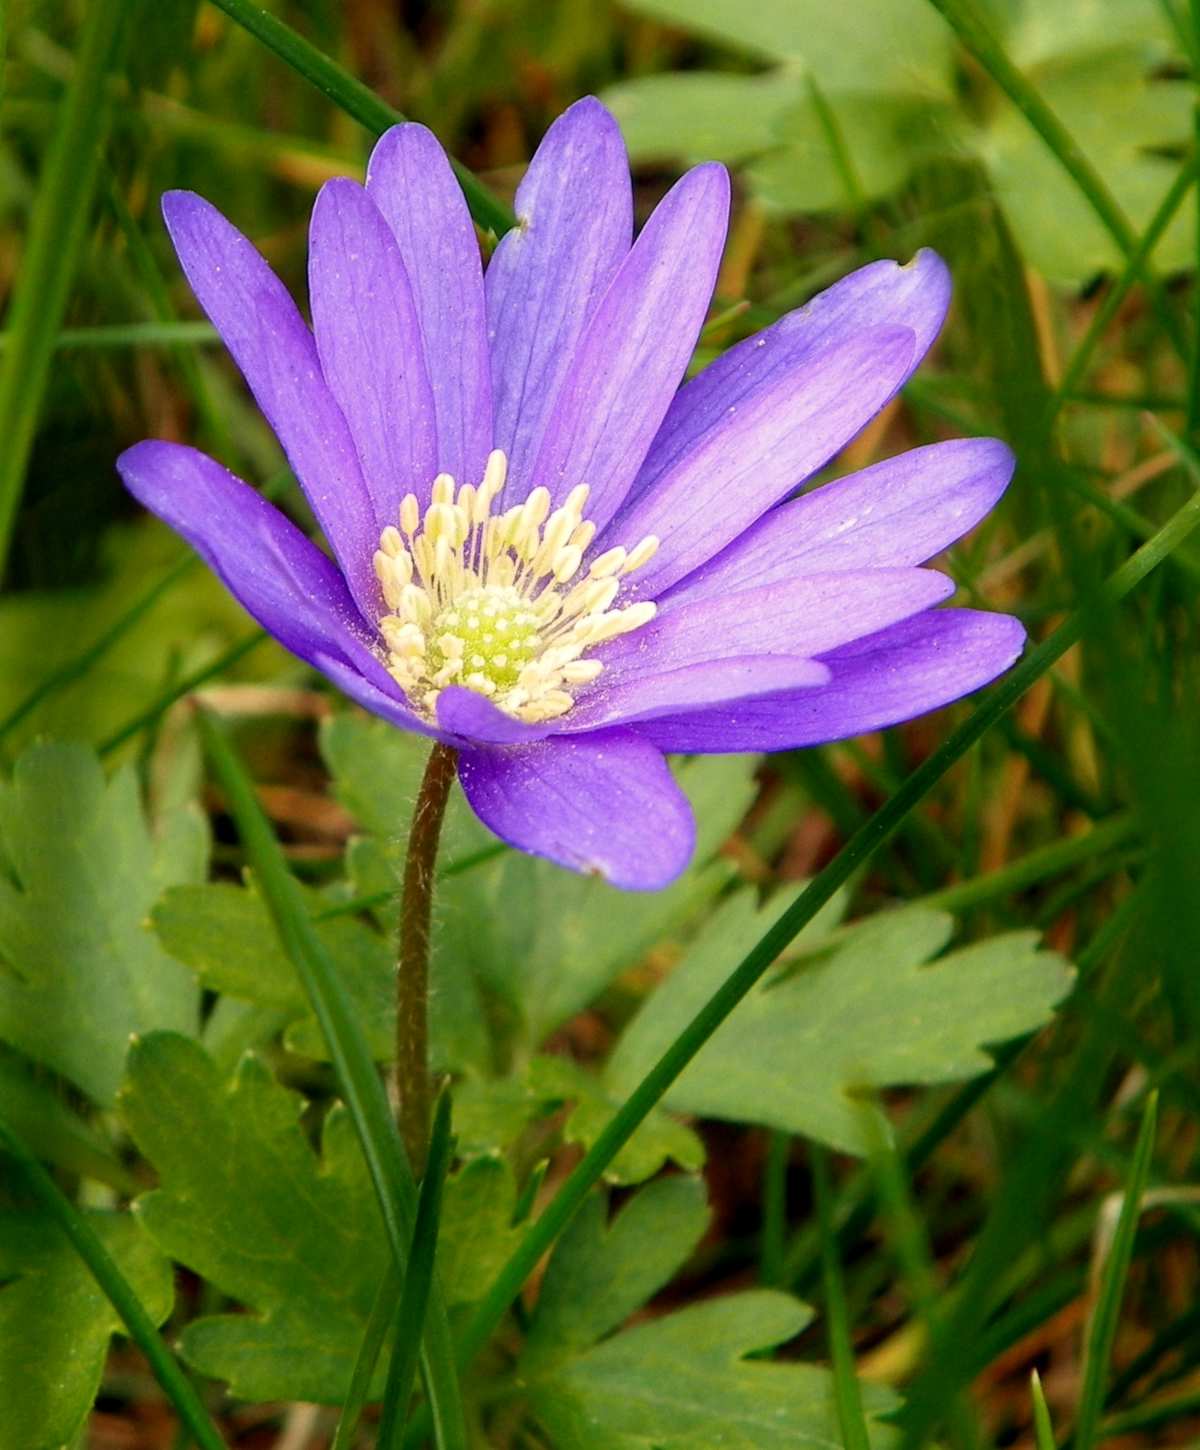 Anemone Grecian Windflower How To Grow And Care For This Flower Shrub